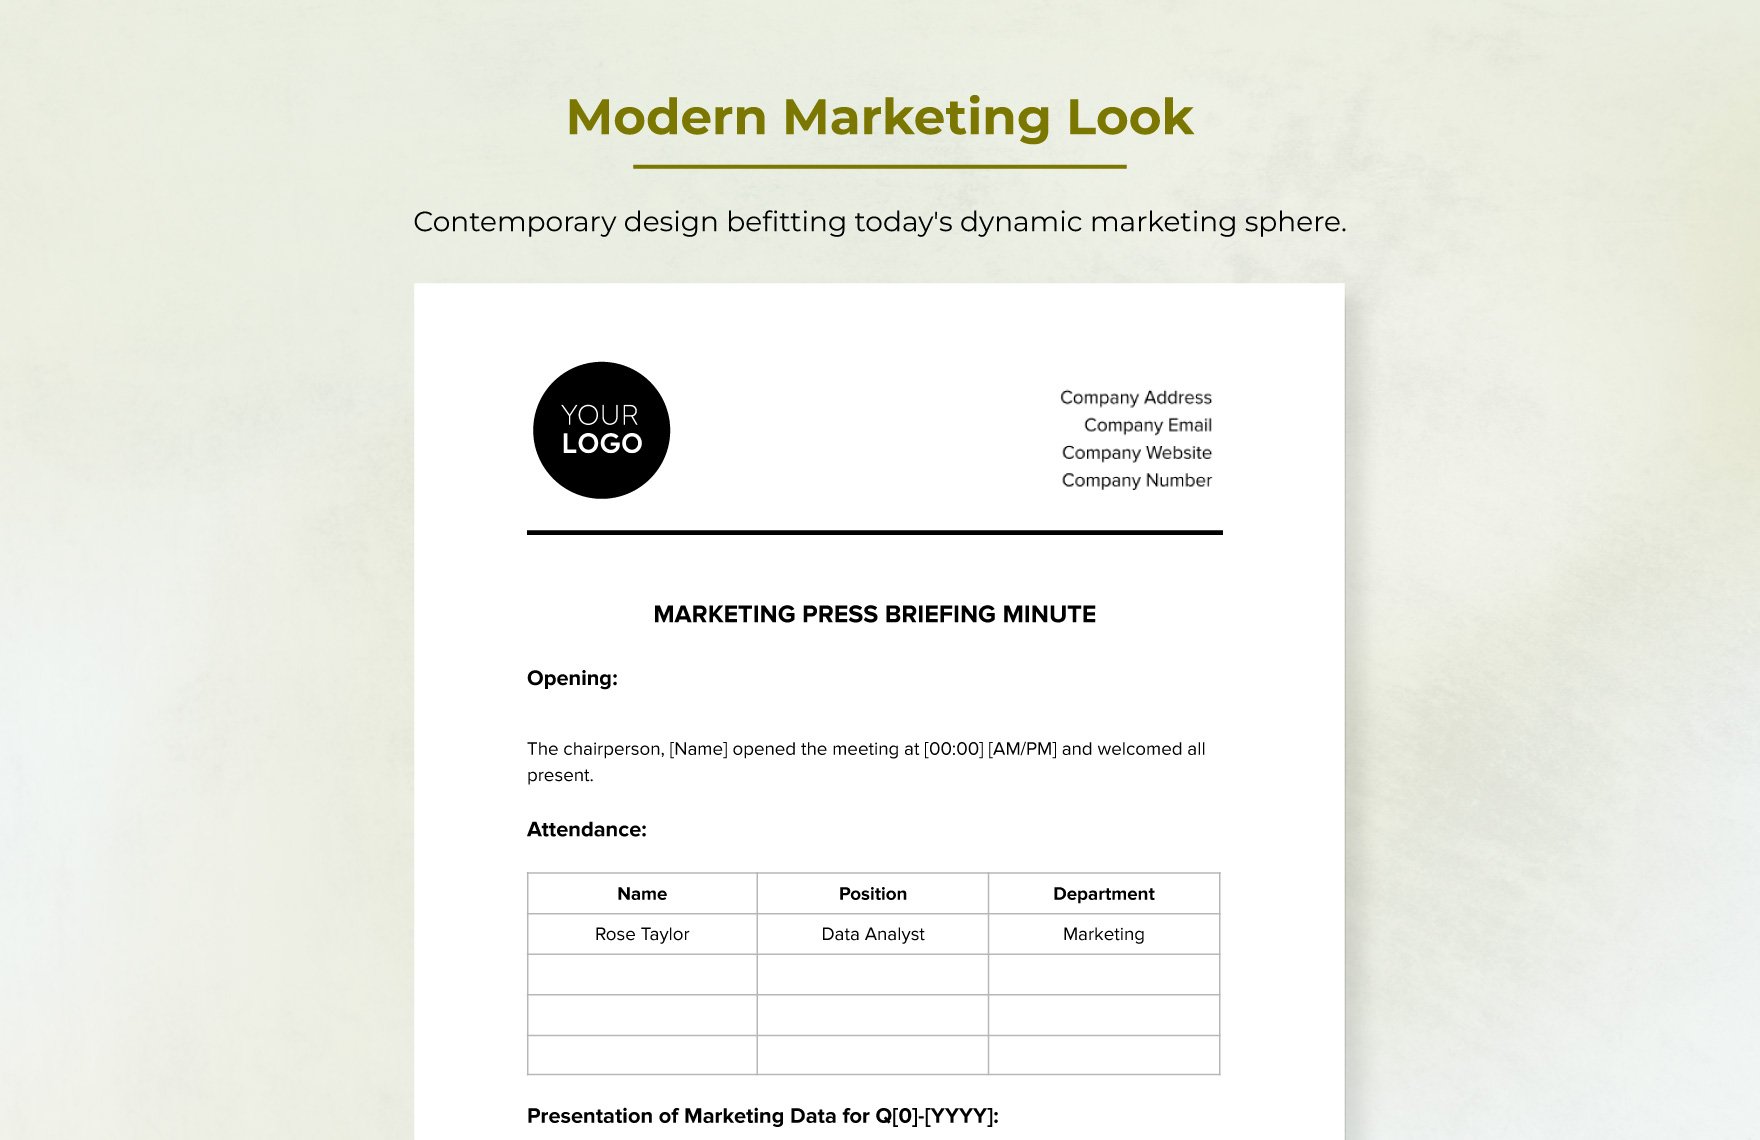 Marketing Press Briefing Minute Template